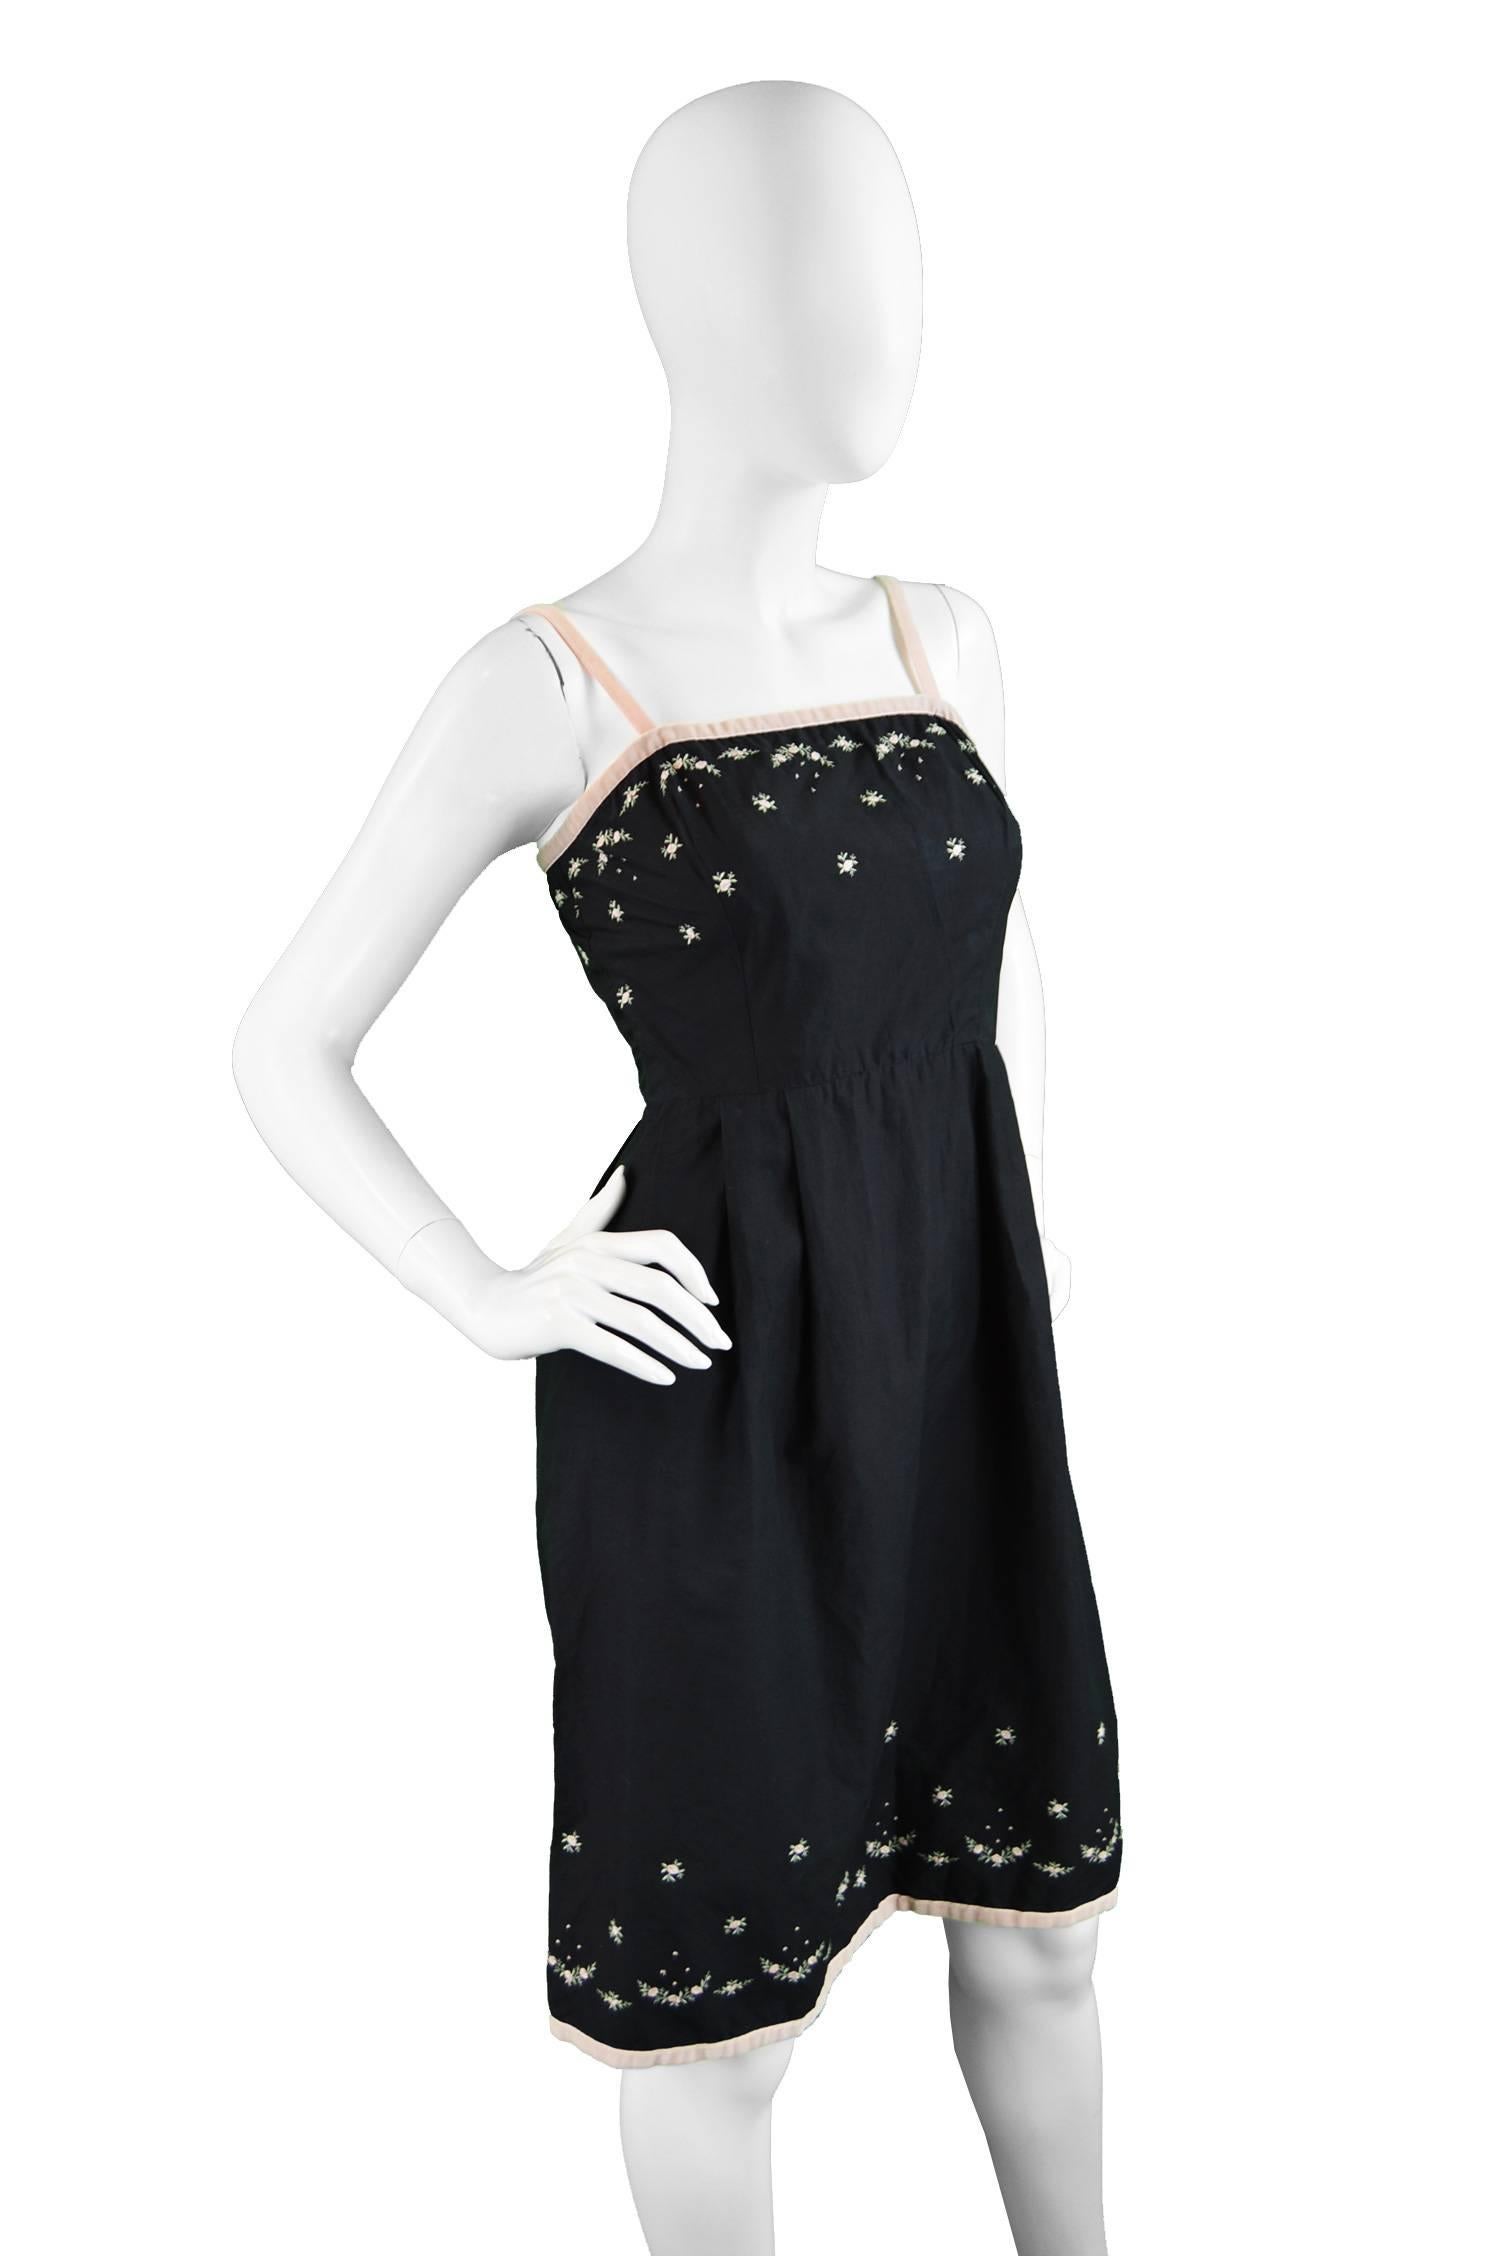 Women's Anne Valore of Paris Couture Black Cotton Dress with Floral Embroidery, 1960s